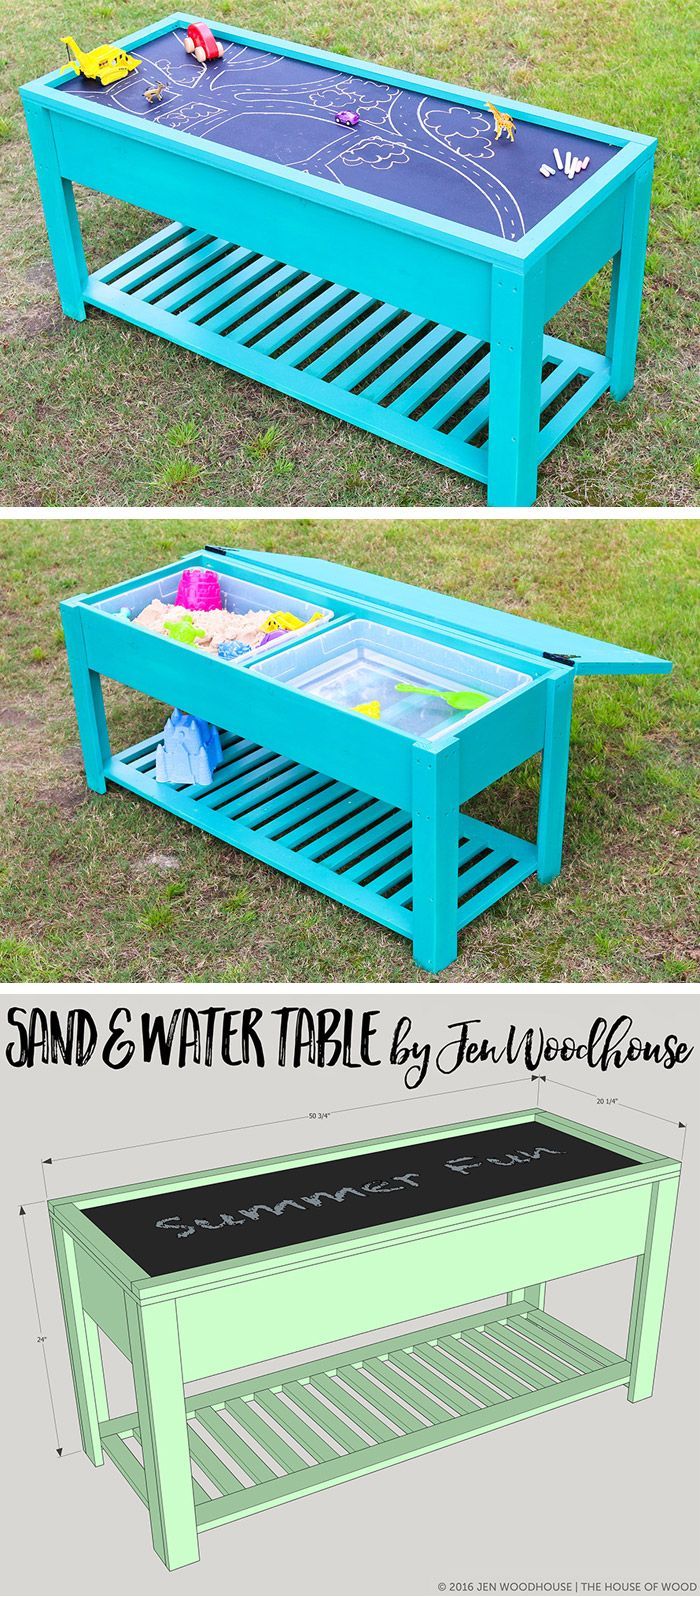 Learn how to build a fun DIY sand and water table for your kids! Free plans by Jen